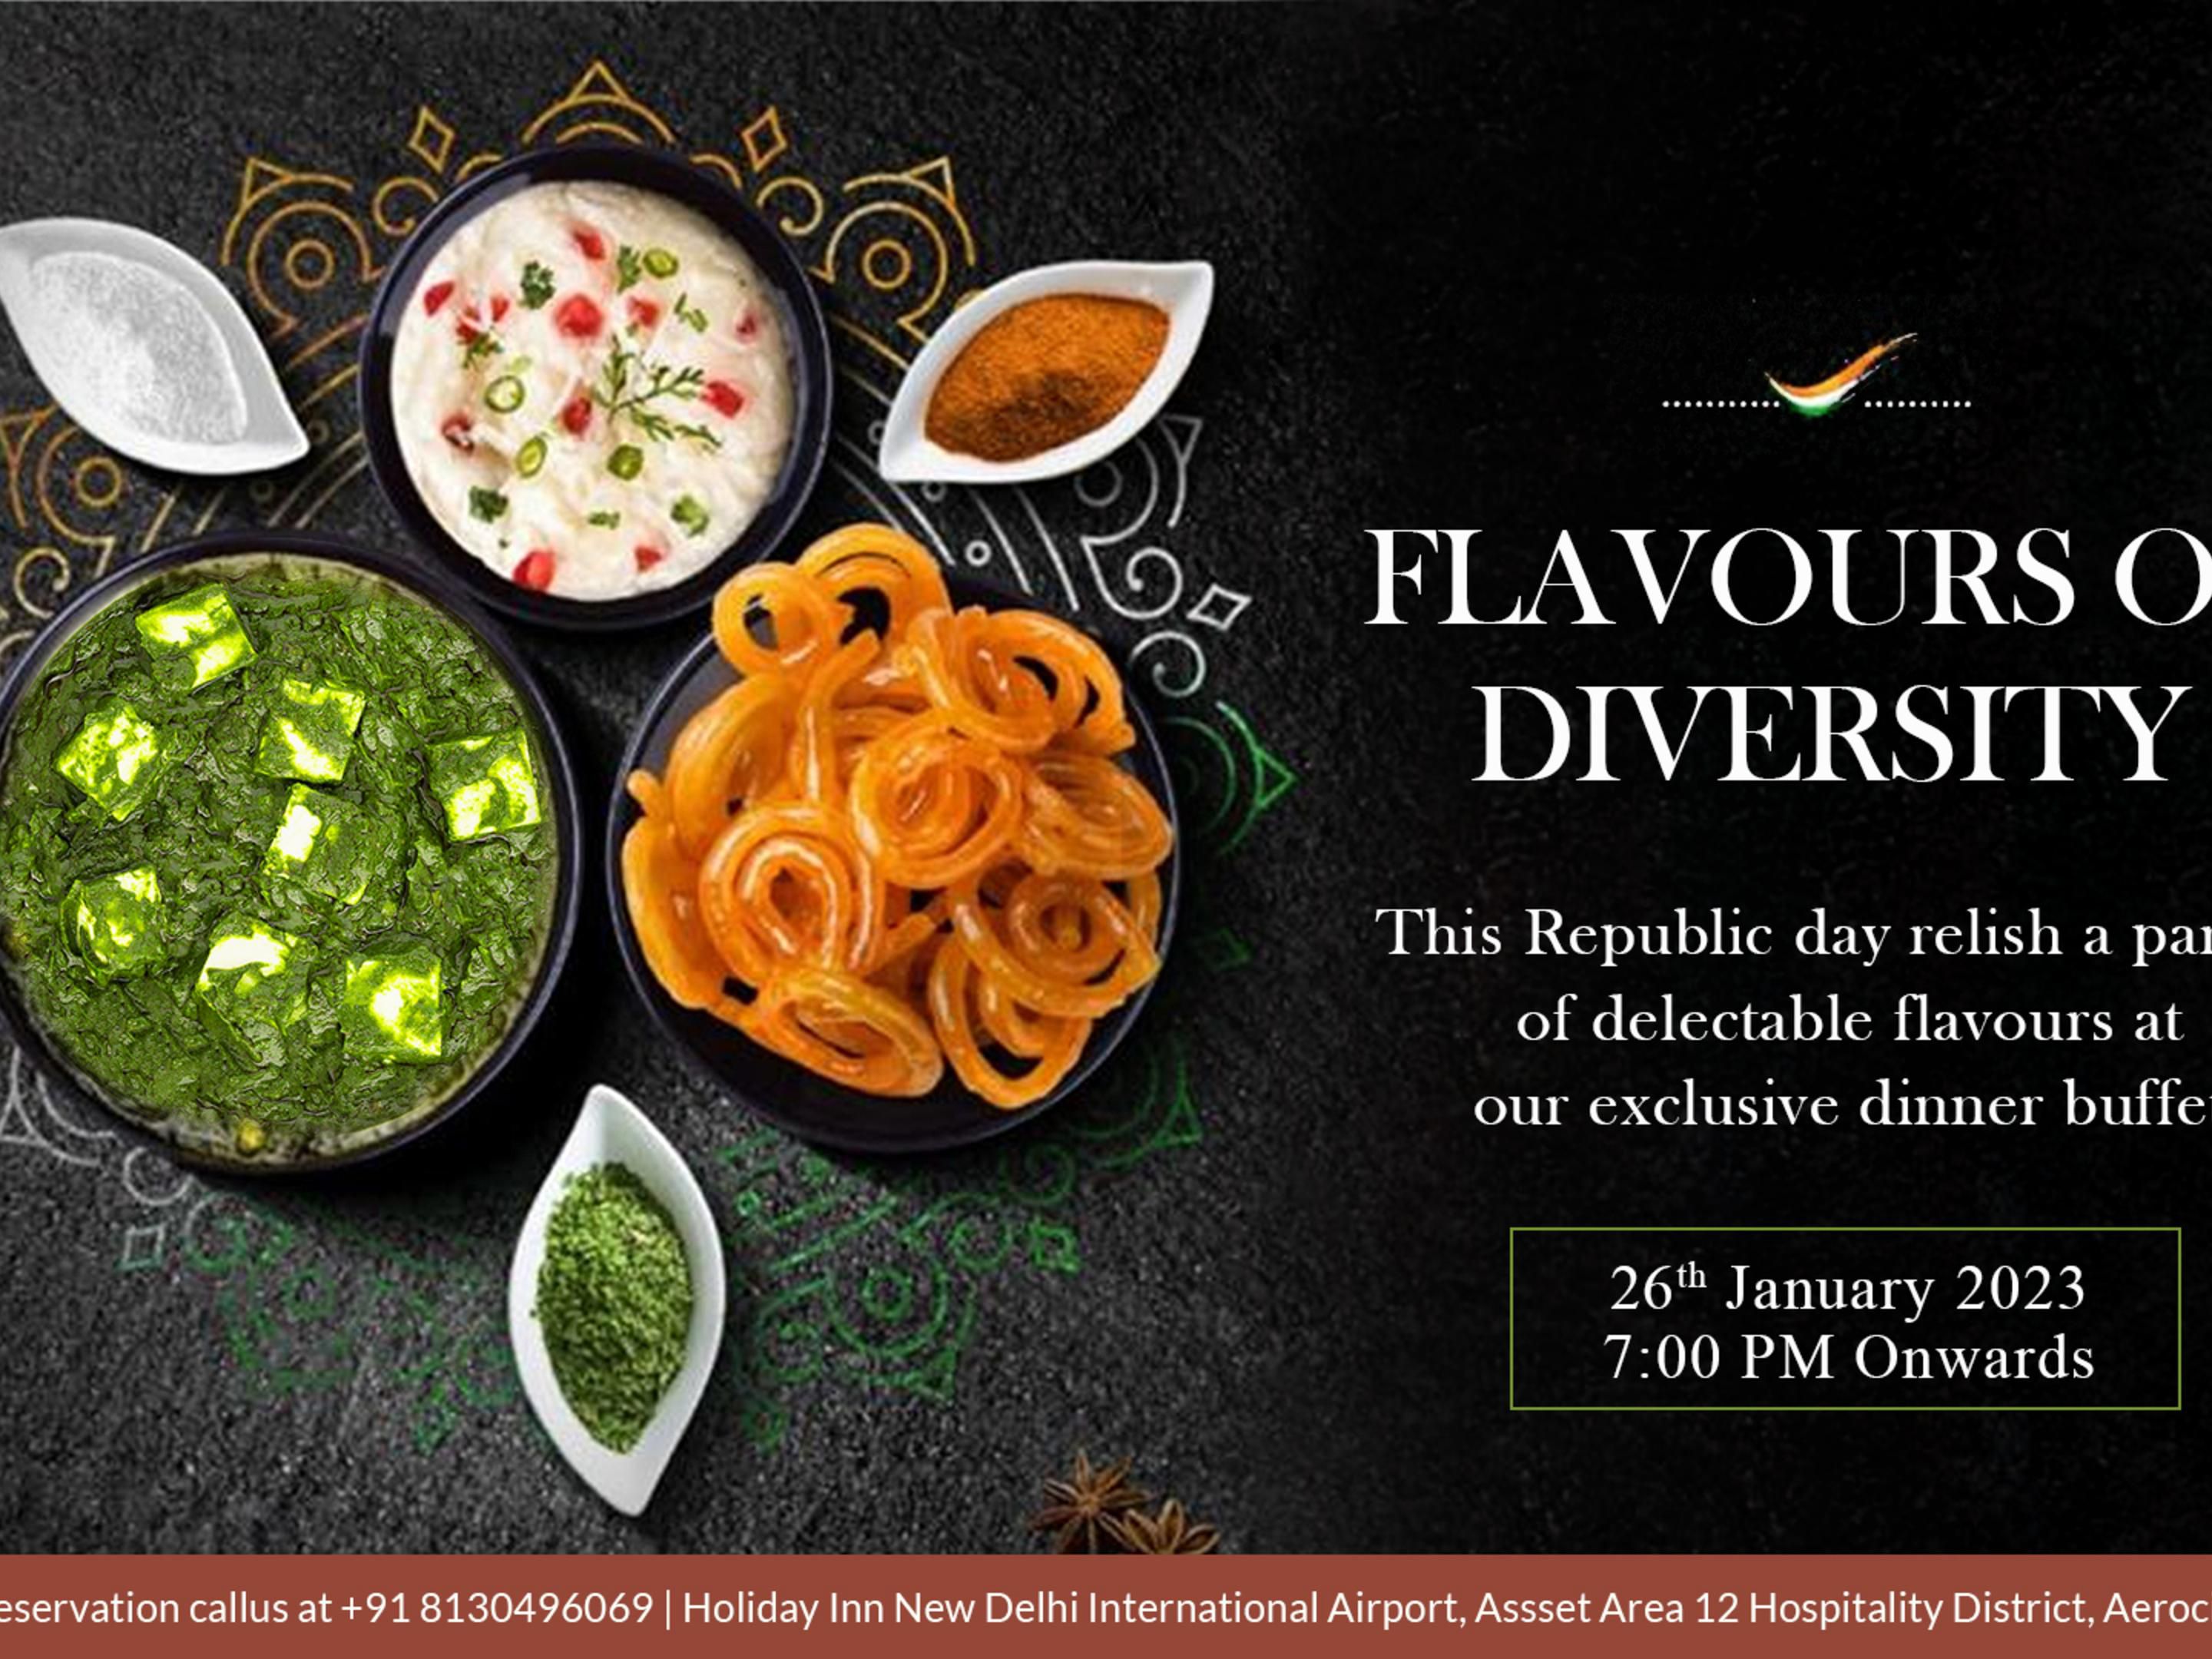 Flavours of Diversity